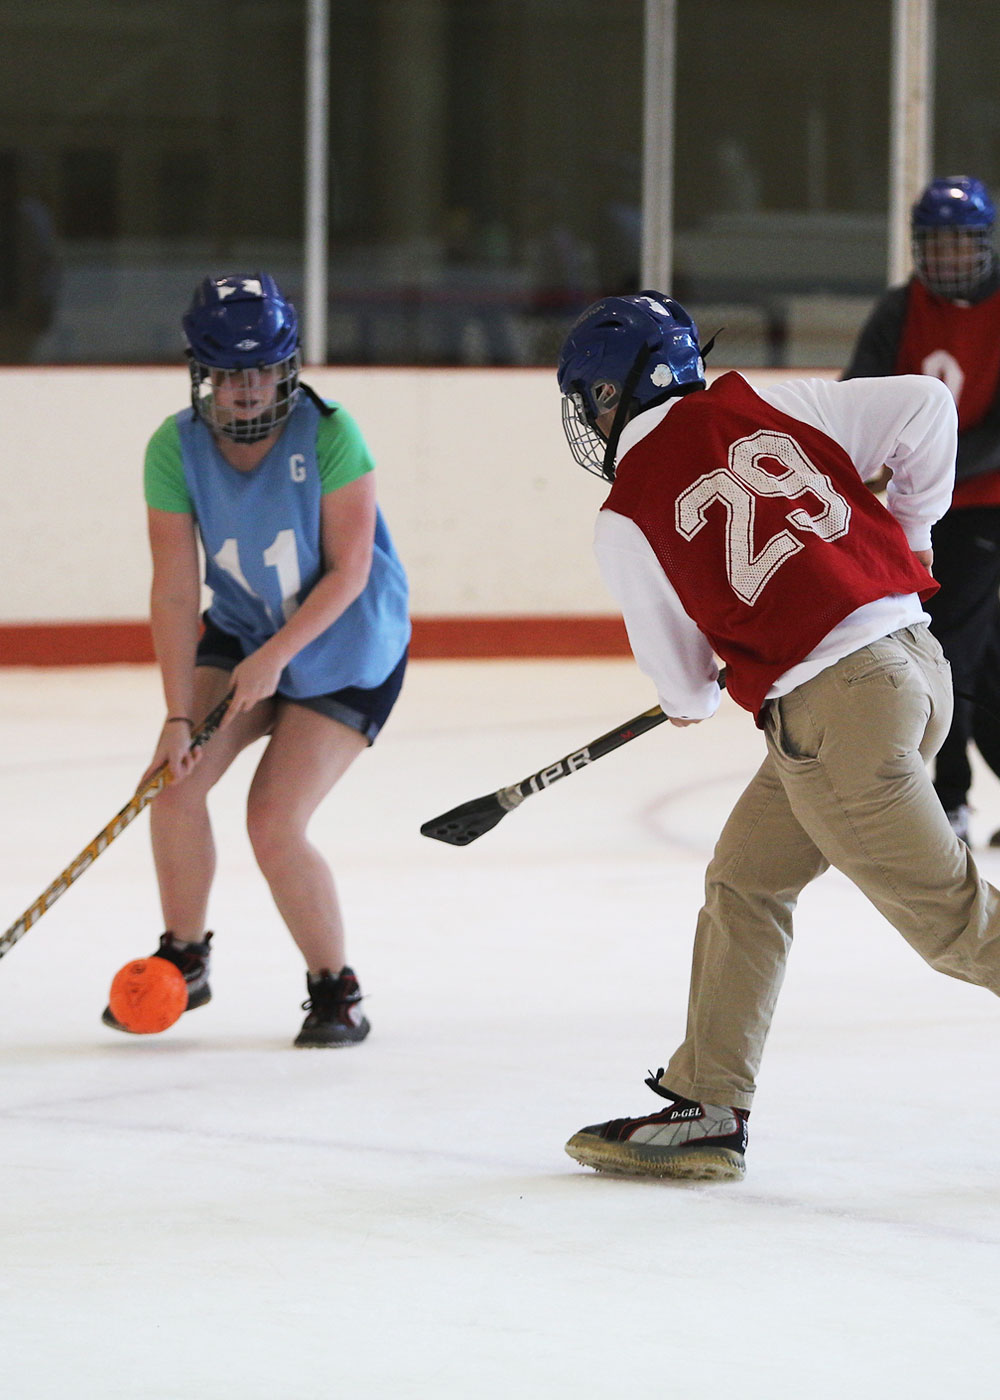 Two students play broomball on opposing teams, one student is protecting the goal